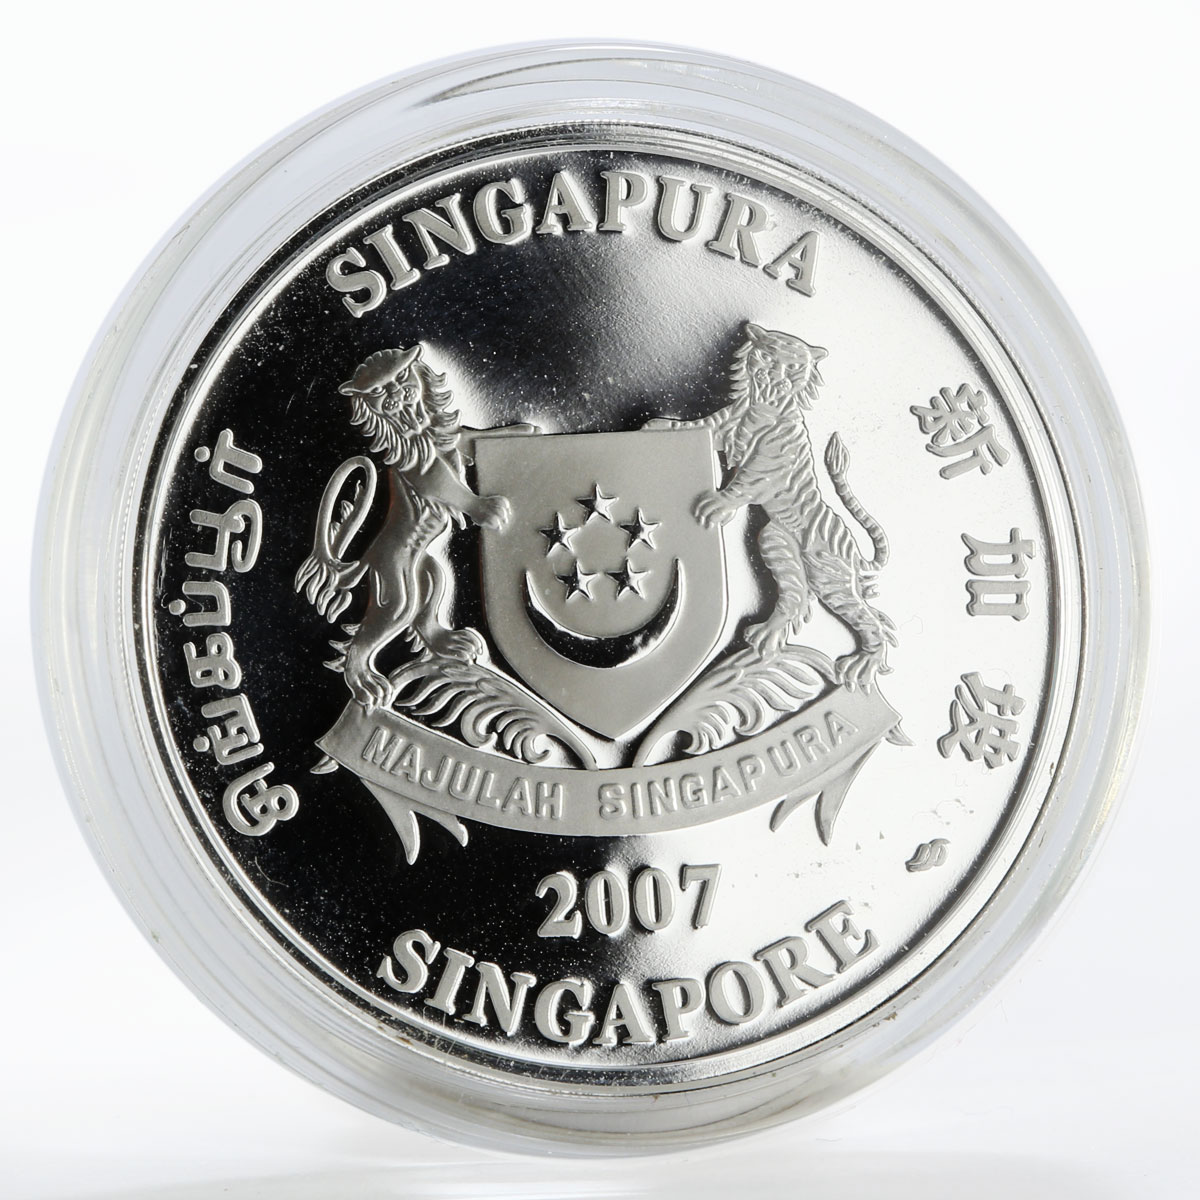 Singapore set of 4 coins 1 dollar Rustic Coast Sea silver proof colored 2007